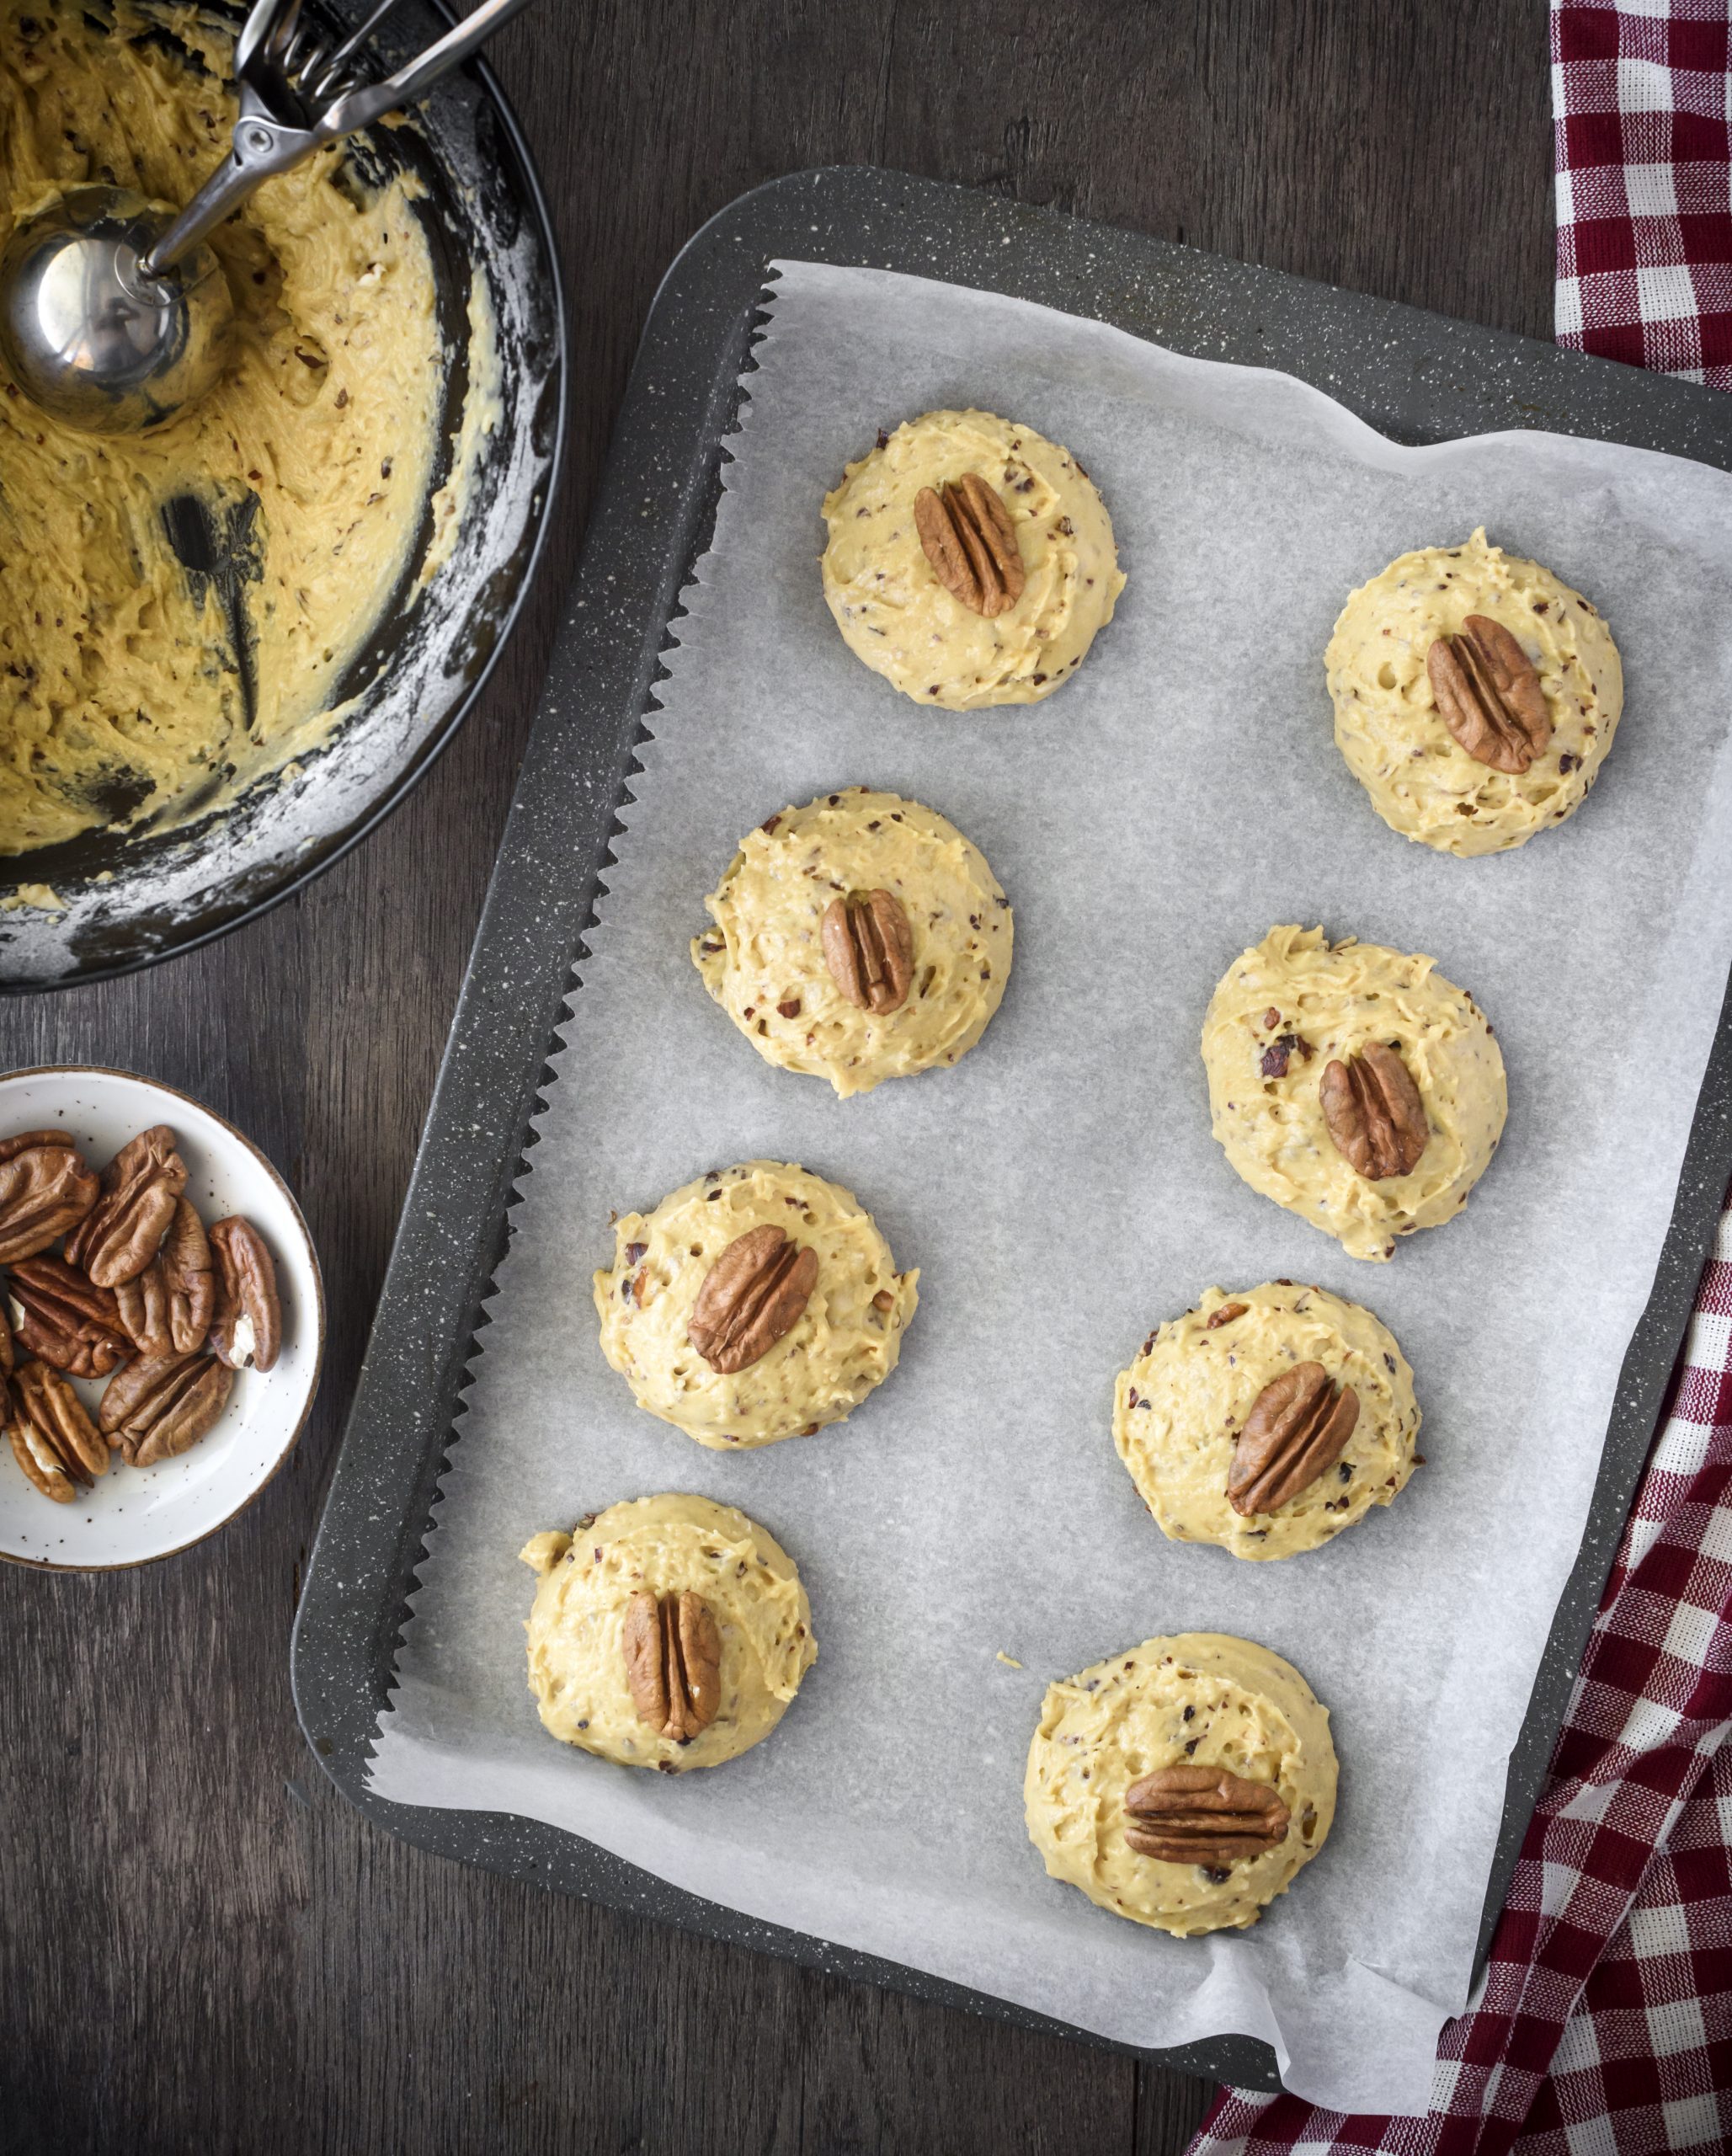 Place the cookies onto a parchment-lined baking sheet, and top each one with a pecan half. 